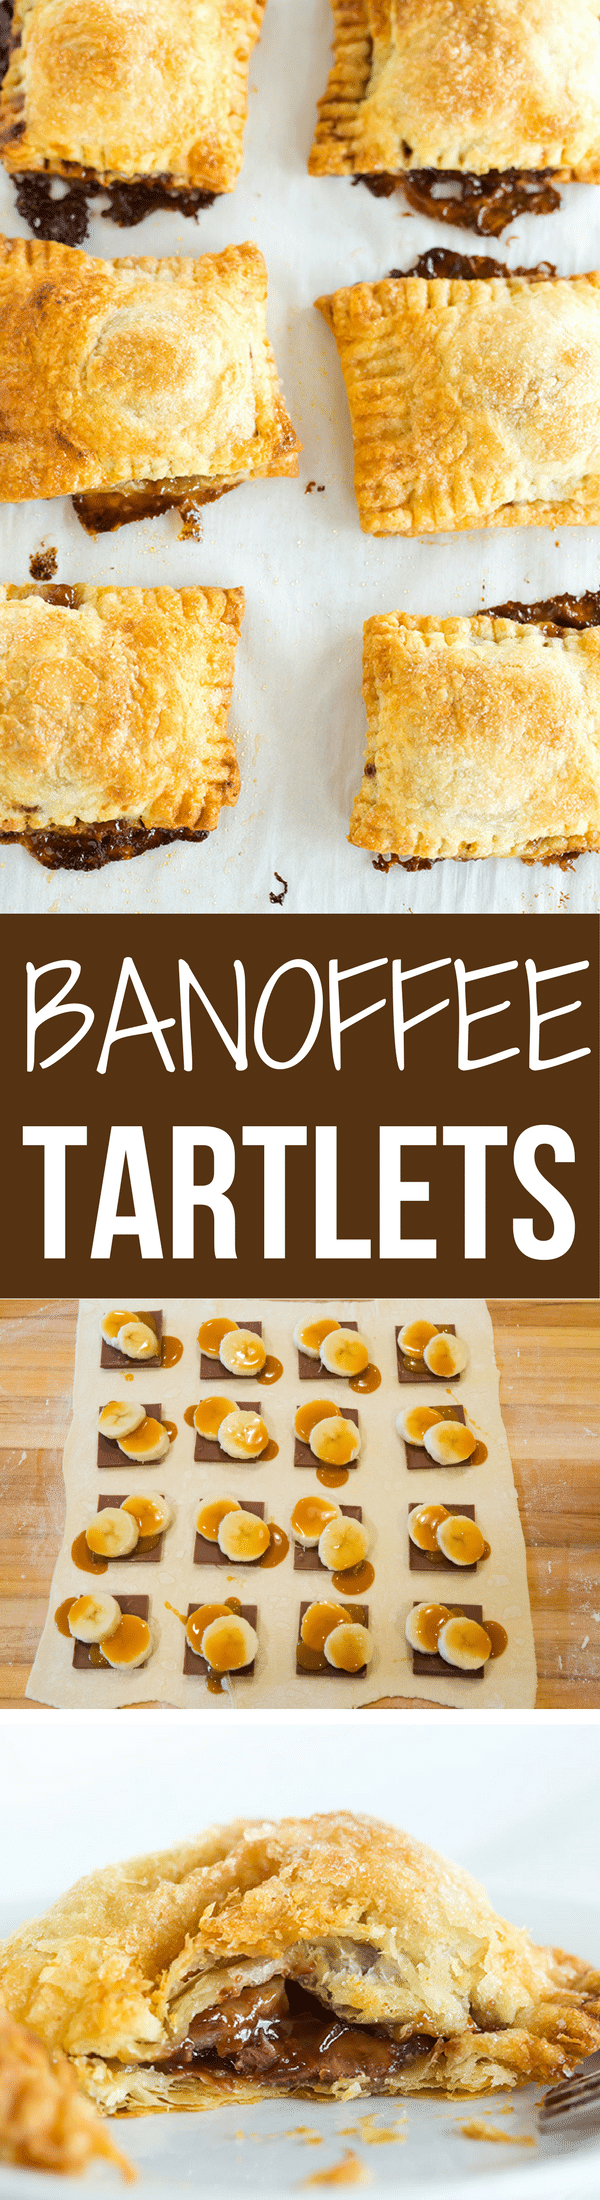 Banoffee Tartlets: A quick and easy dessert using puff pastry filled with chocolate, bananas and dulce de leche. All of the flavors of a banoffee pie without all of the work!